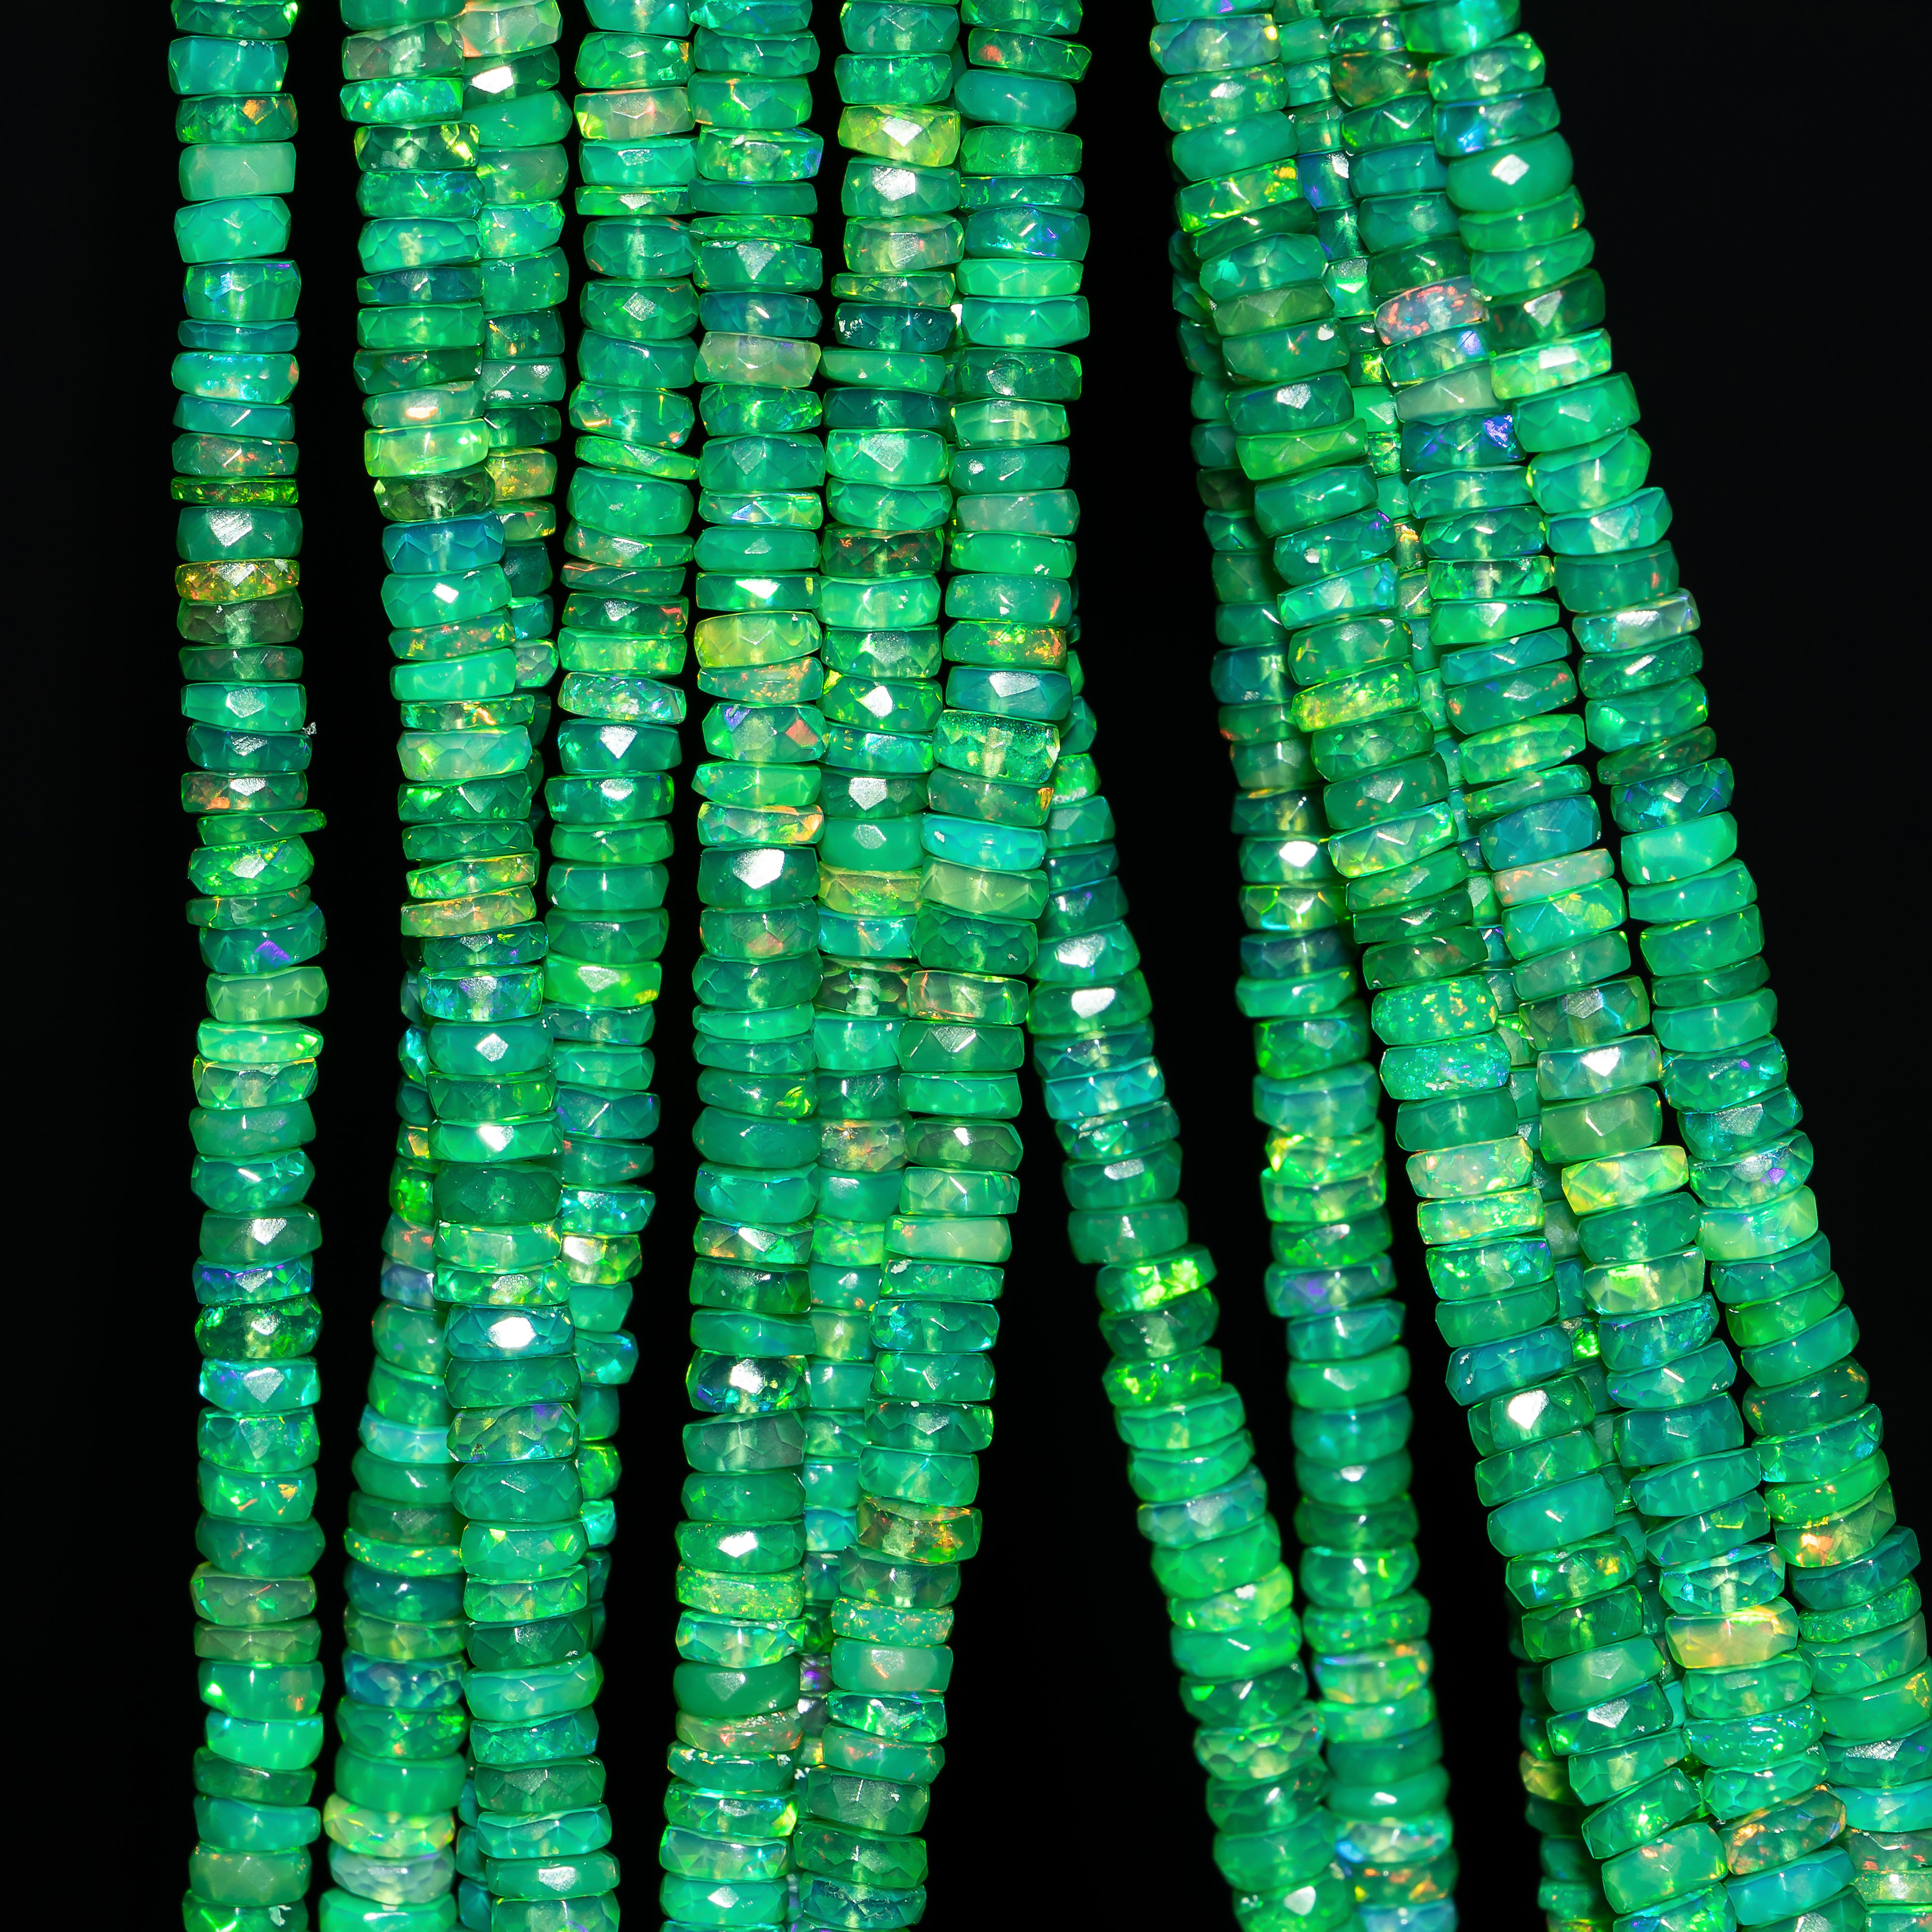 4-6 mm Green Opal Faceted Tyre Shape Gemstone Jewelry Making Beads TGS-4605